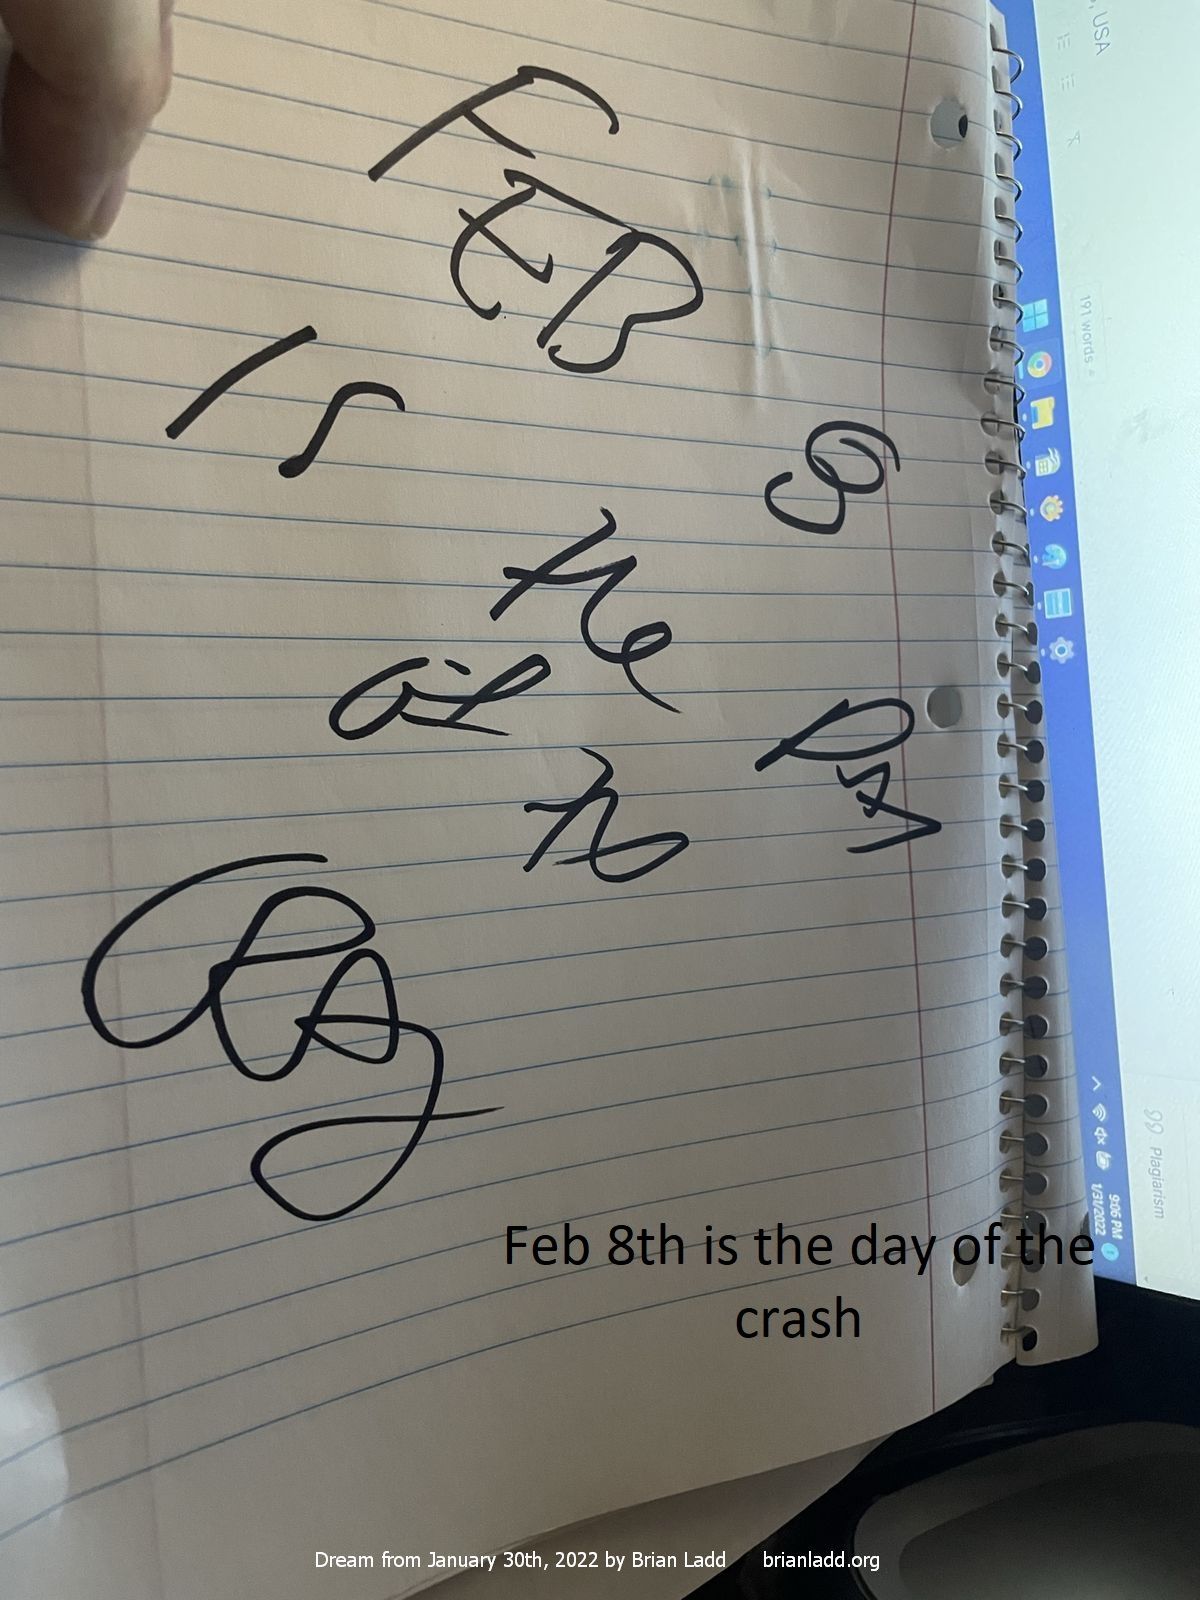 30 jan 2022 1  Feb 8th is the day of the crash...
Feb 8th is the day of the crash.
